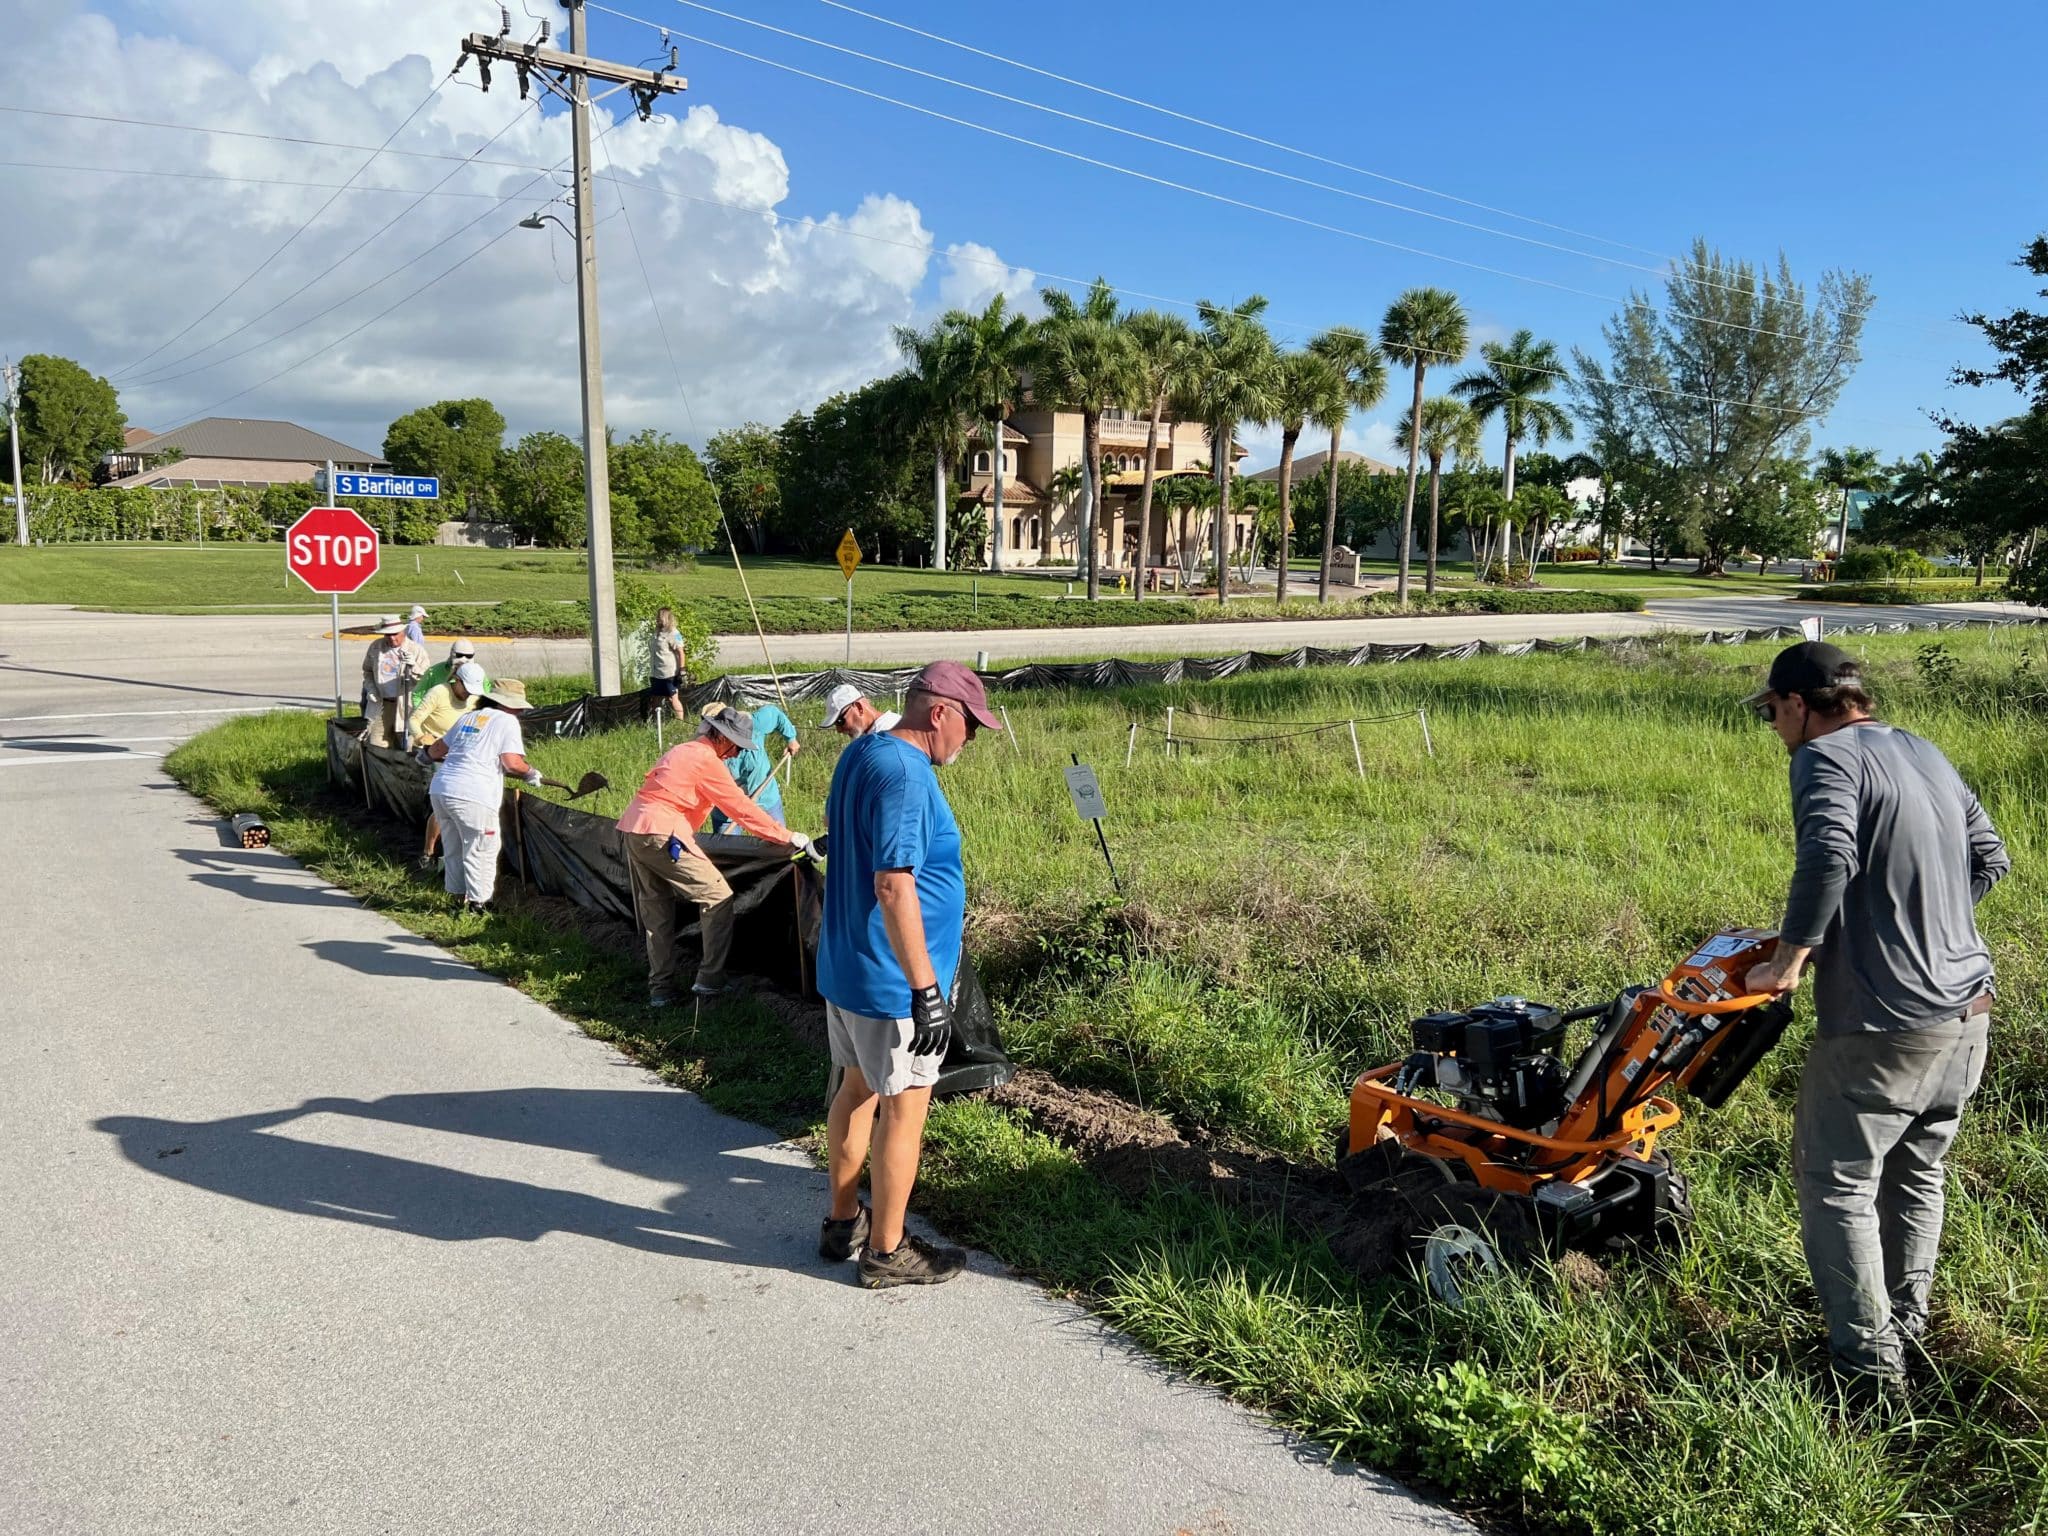 The corner of Hawaii Drive and South Barfield Ave has been a troublesome area for the tortoises. The team works in tandem to get the fencing secured.